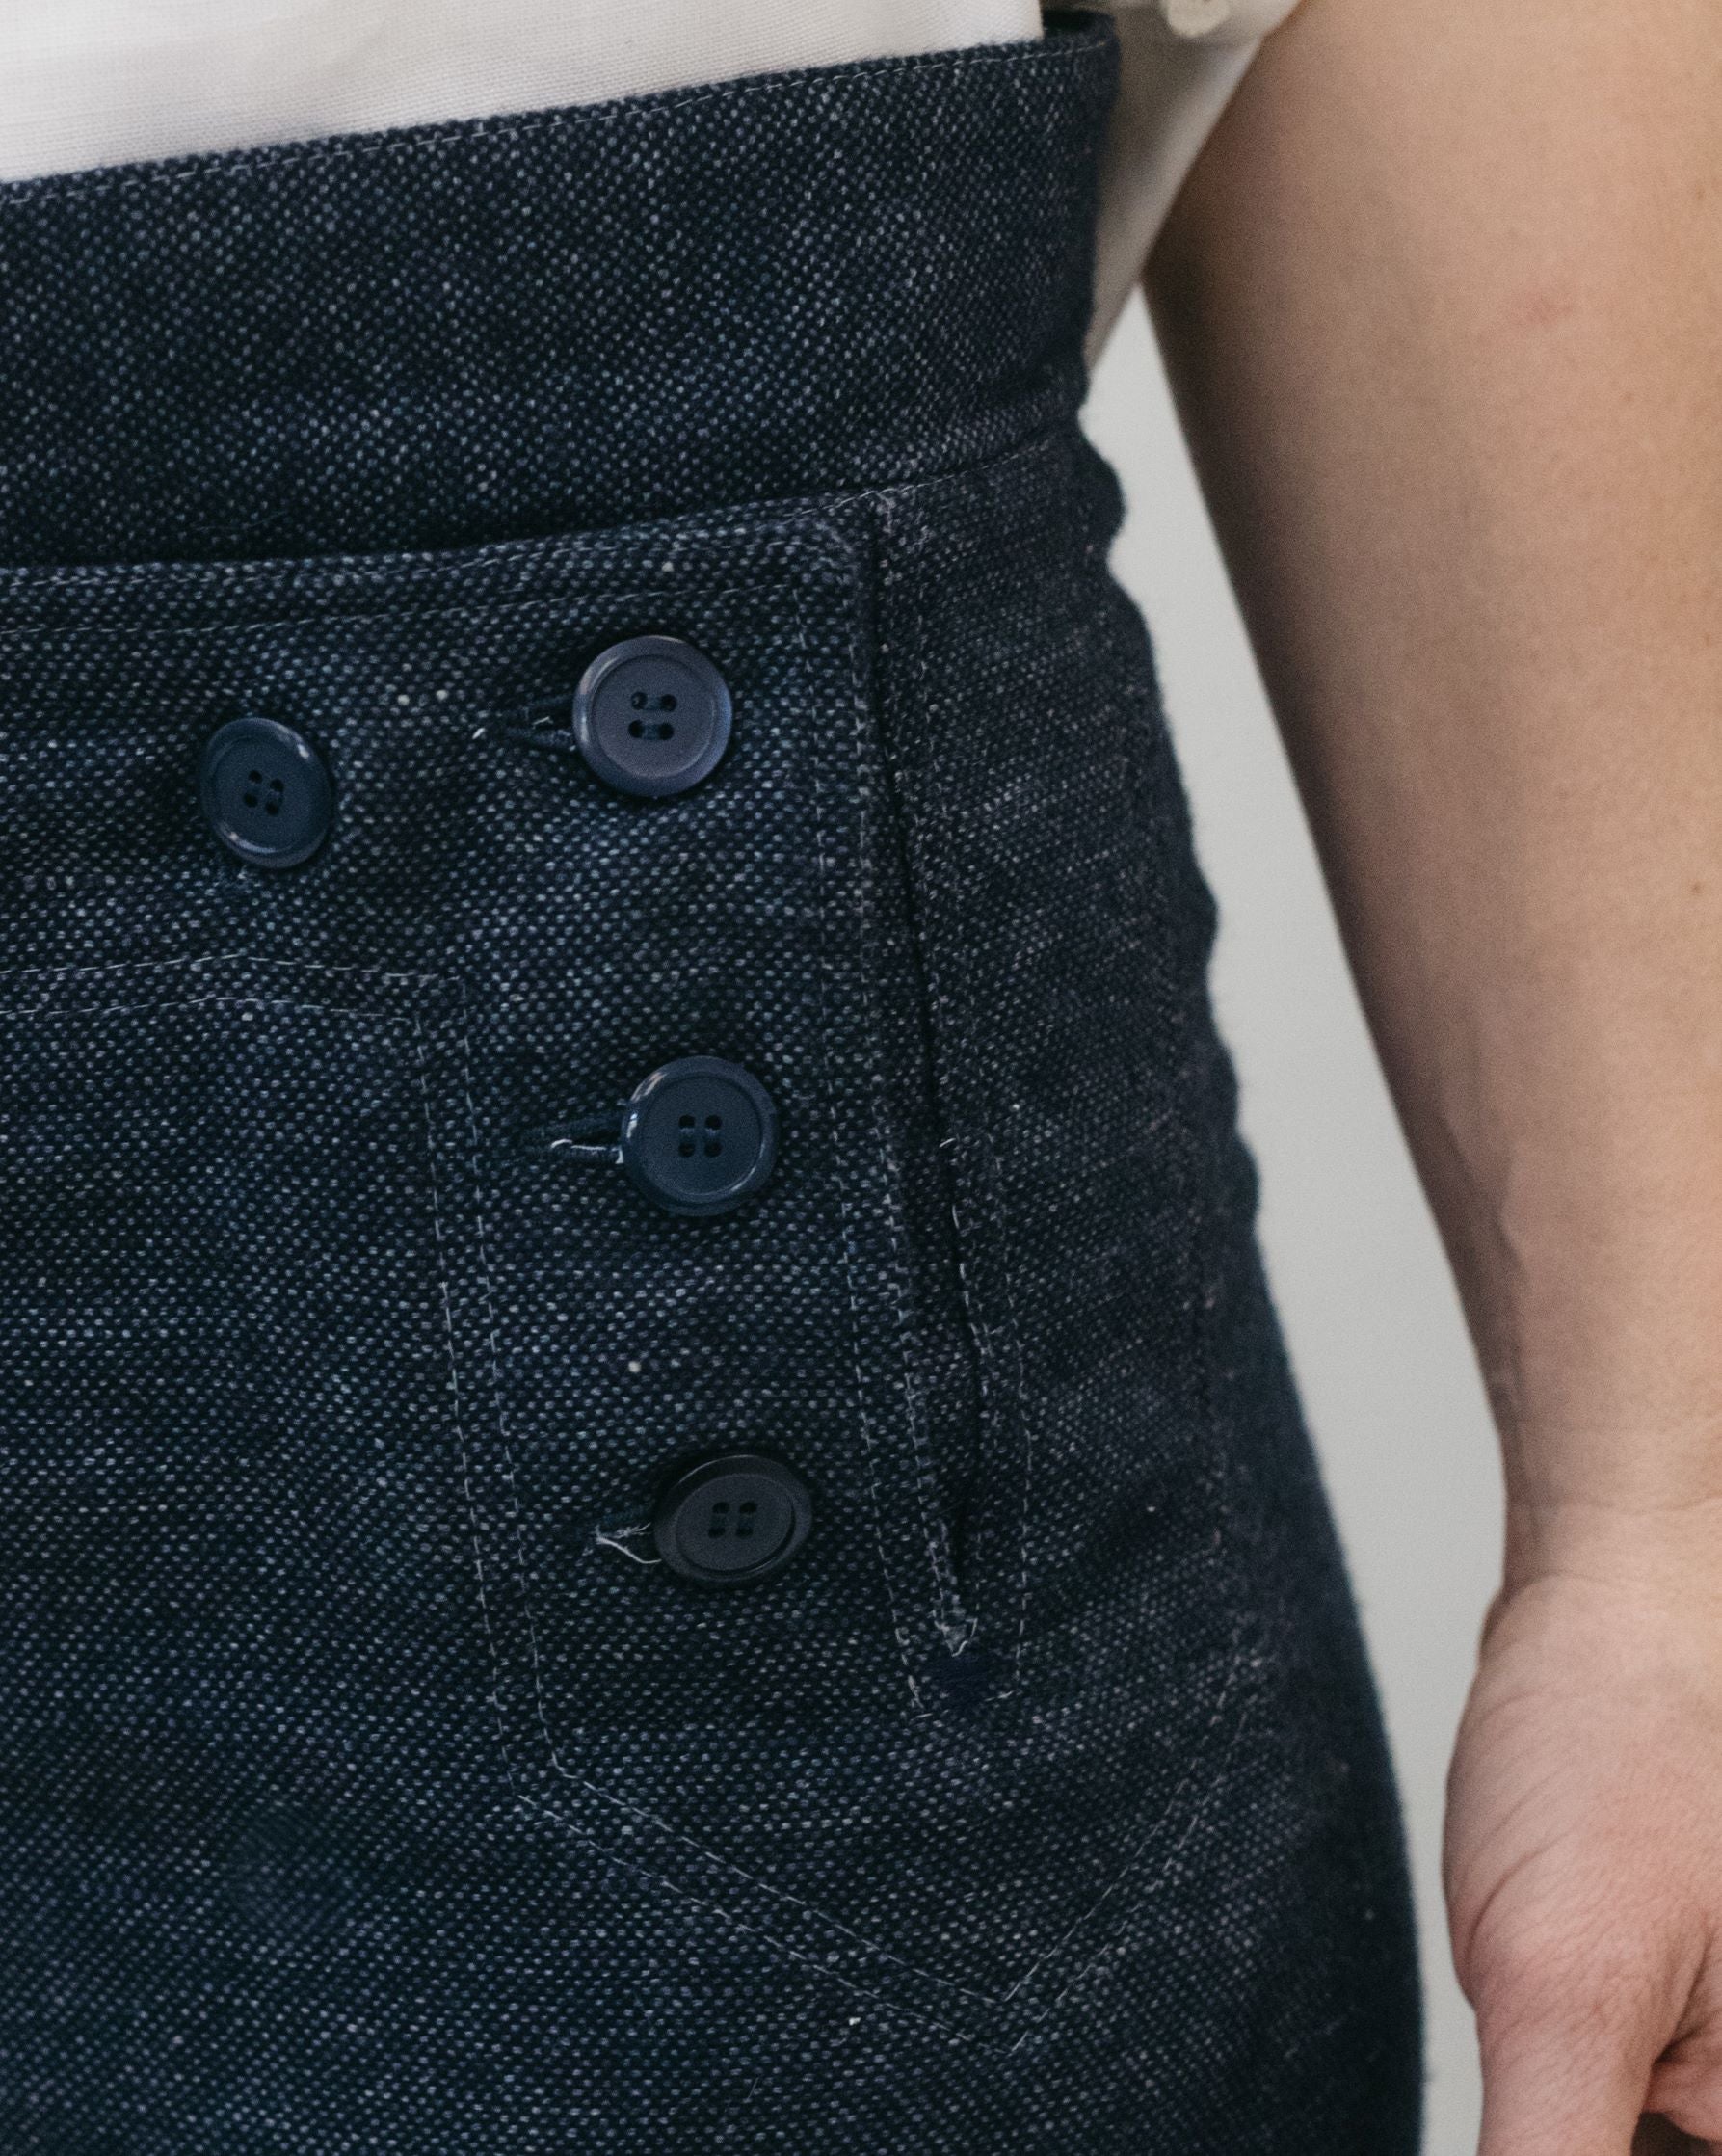 Close up of buttons on the 229 sailor pants.